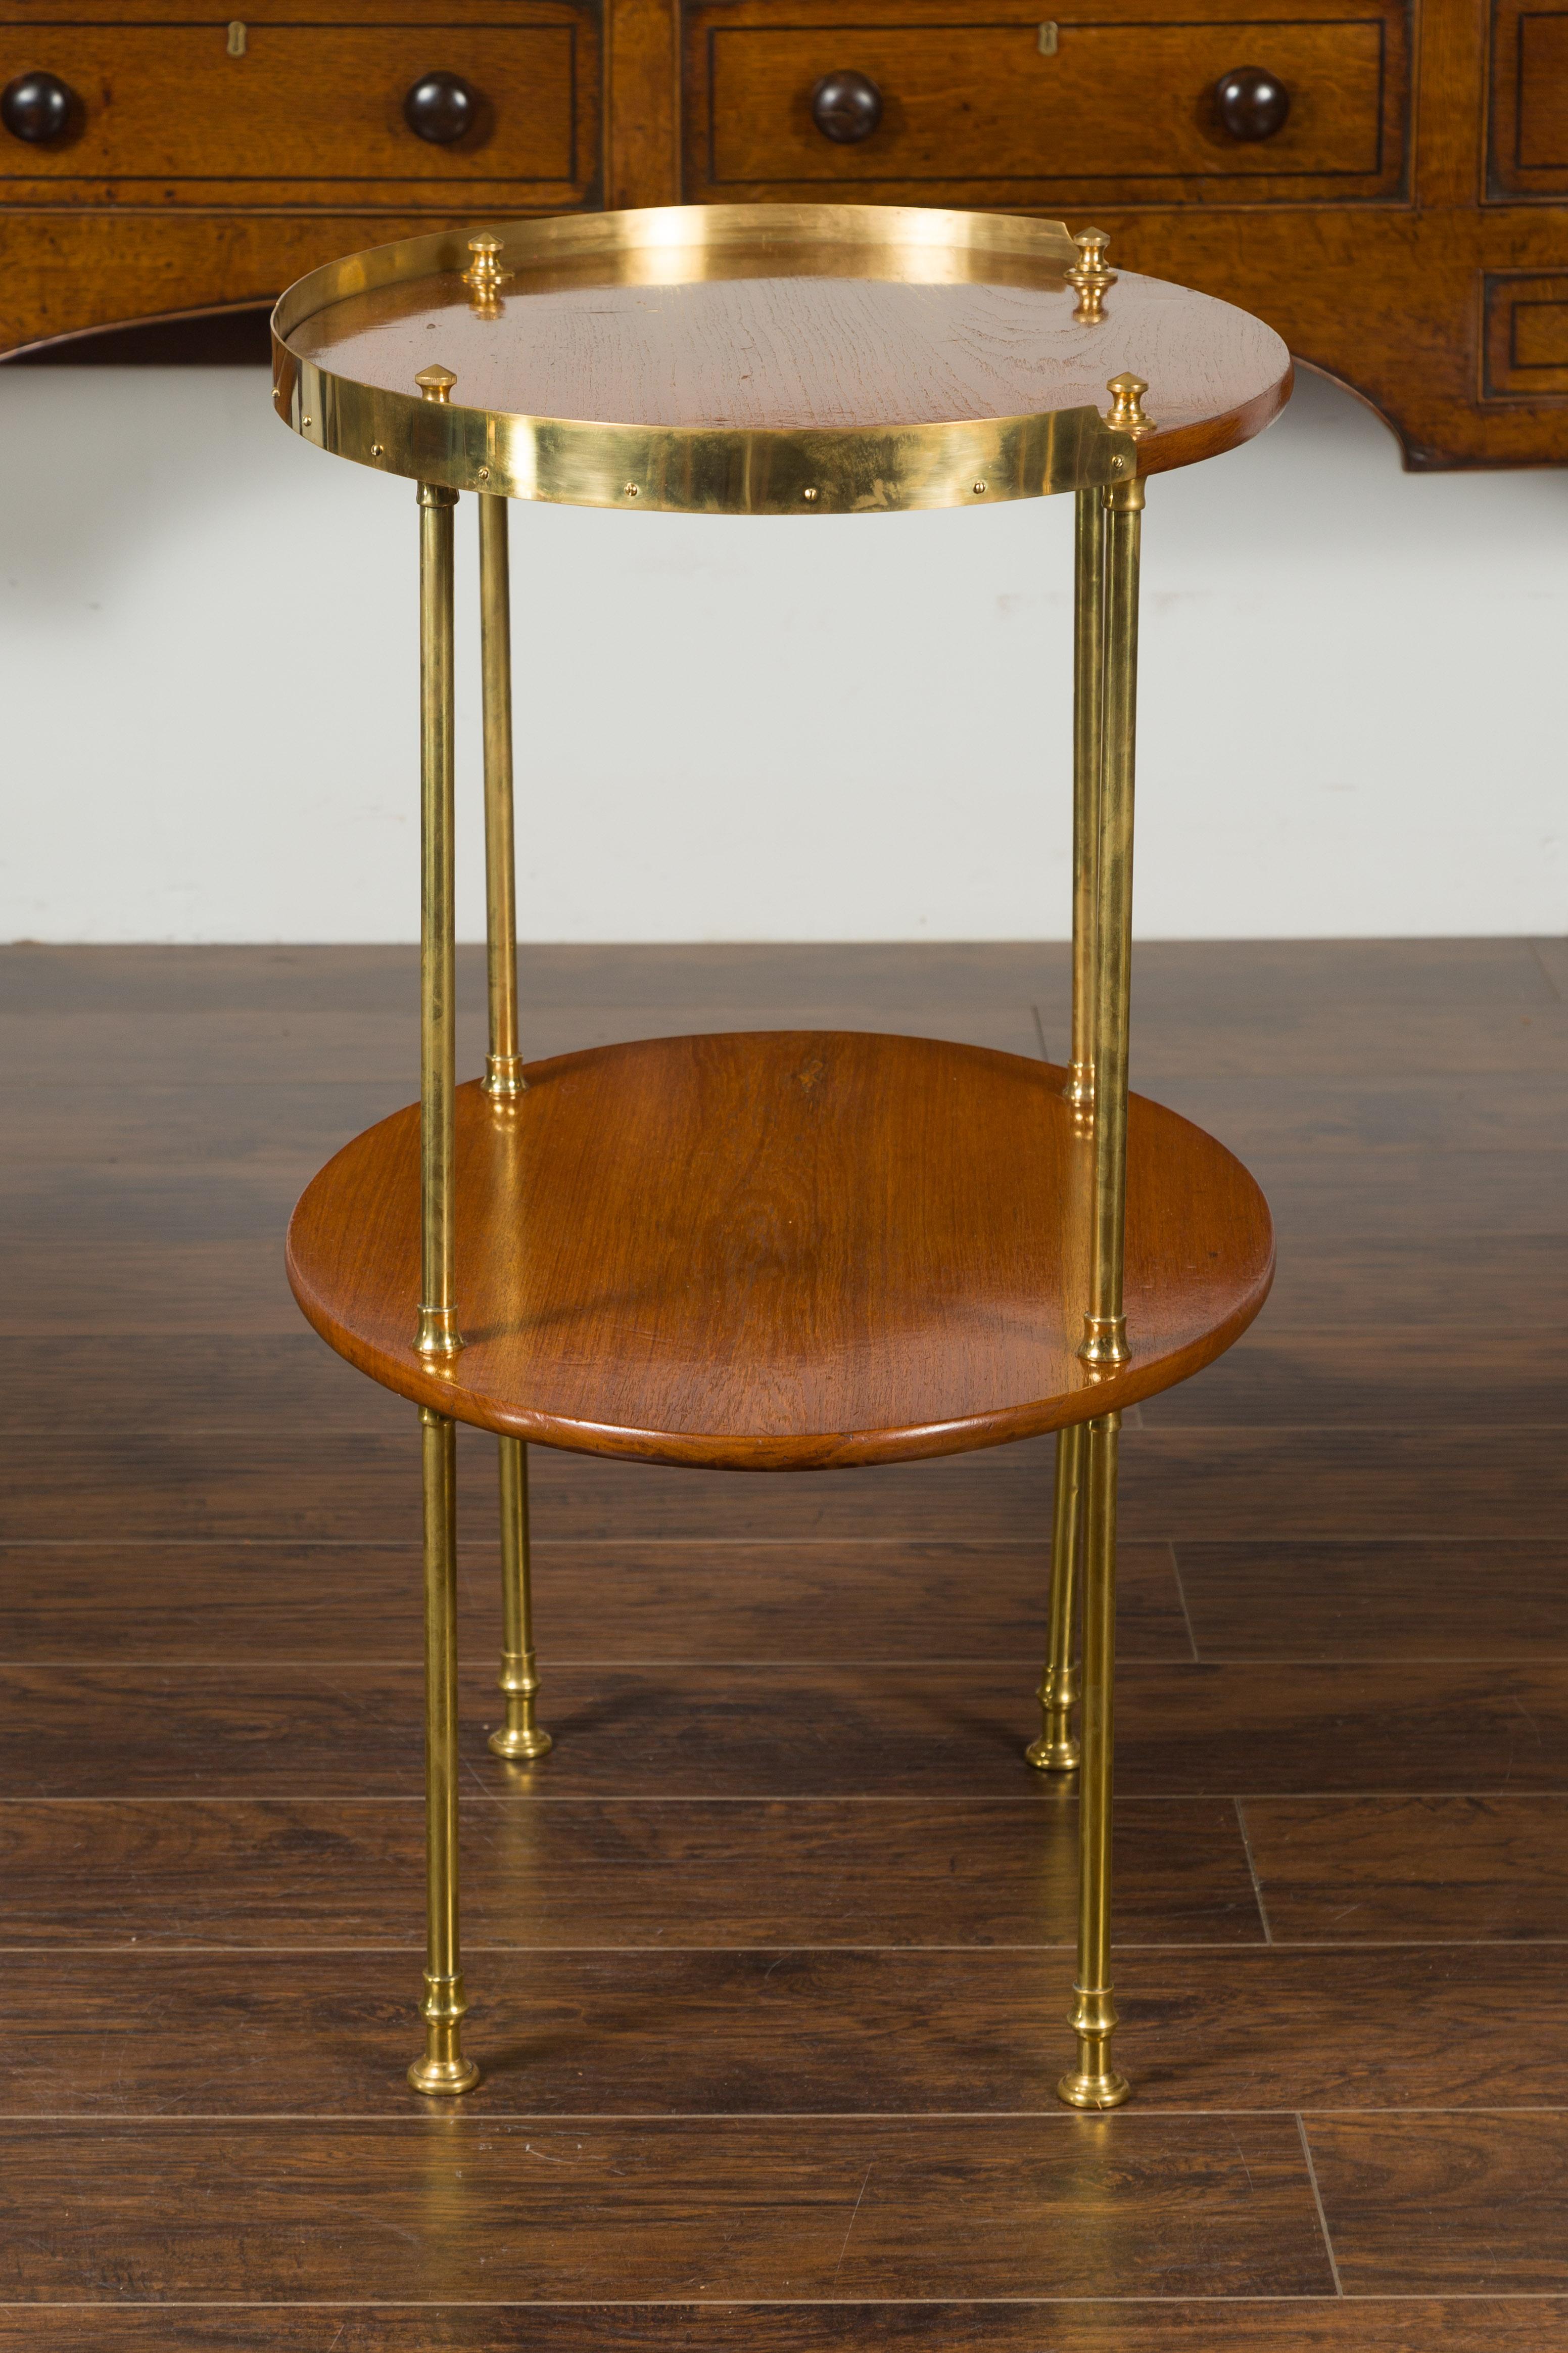 English Midcentury Mahogany Oval Two-Tiered Table with Brass Accents For Sale 5